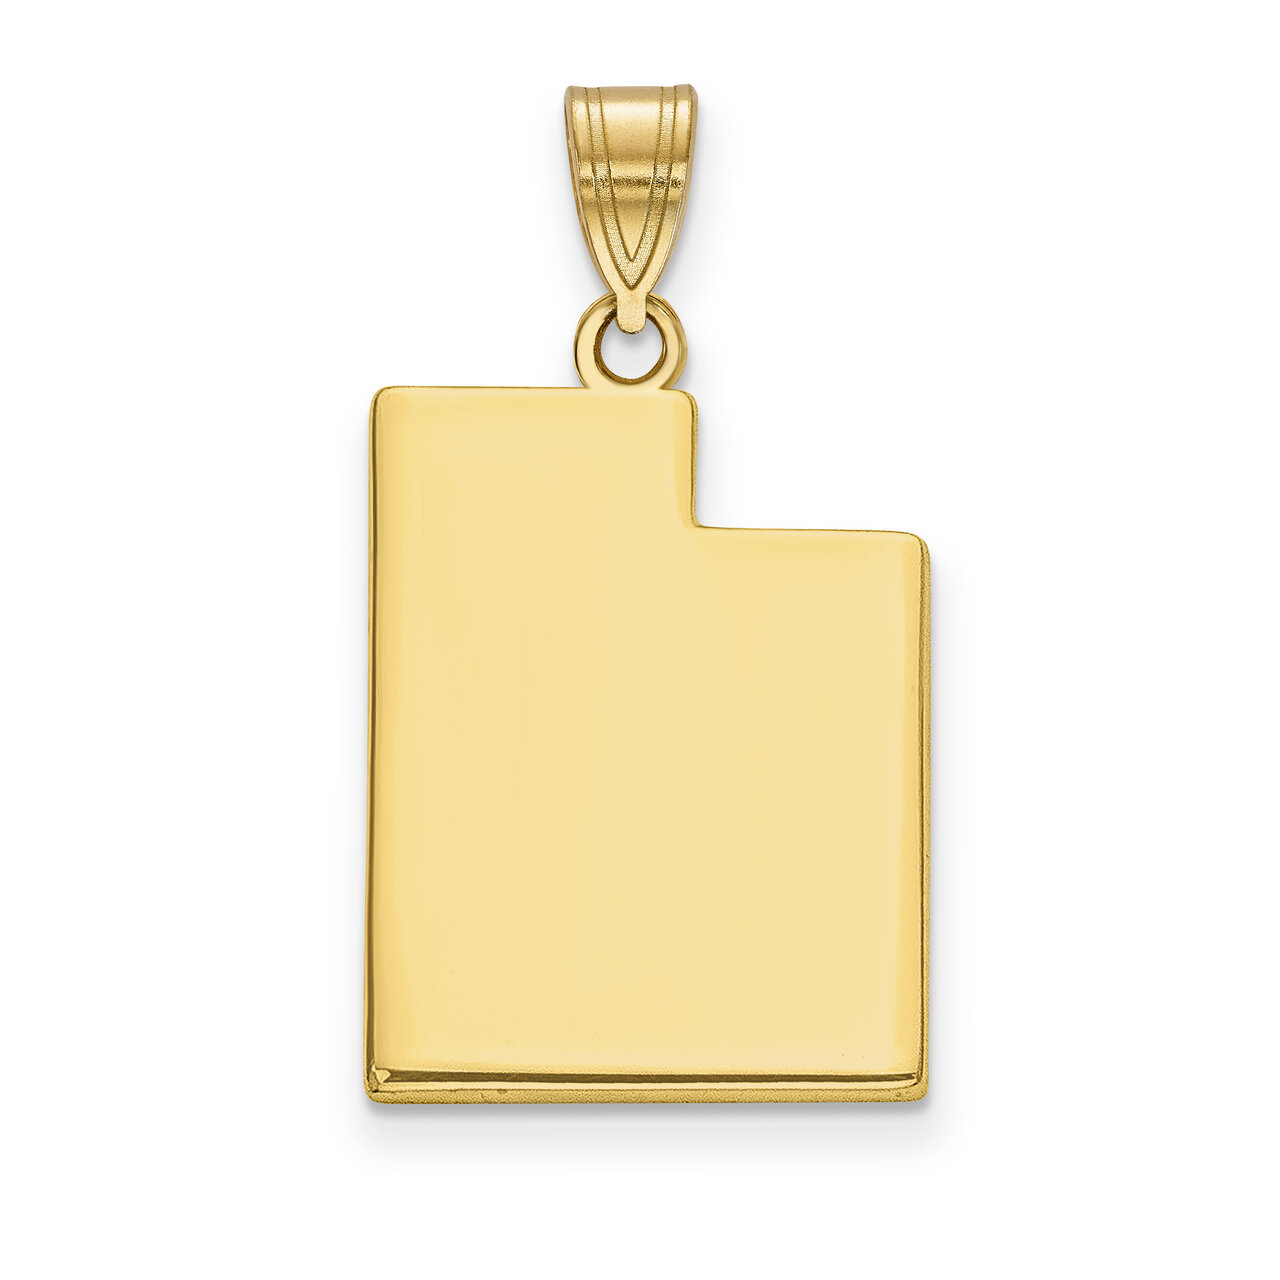 Utah State Pendant Charm Gold-plated on Silver Engravable XNA707GP-UT